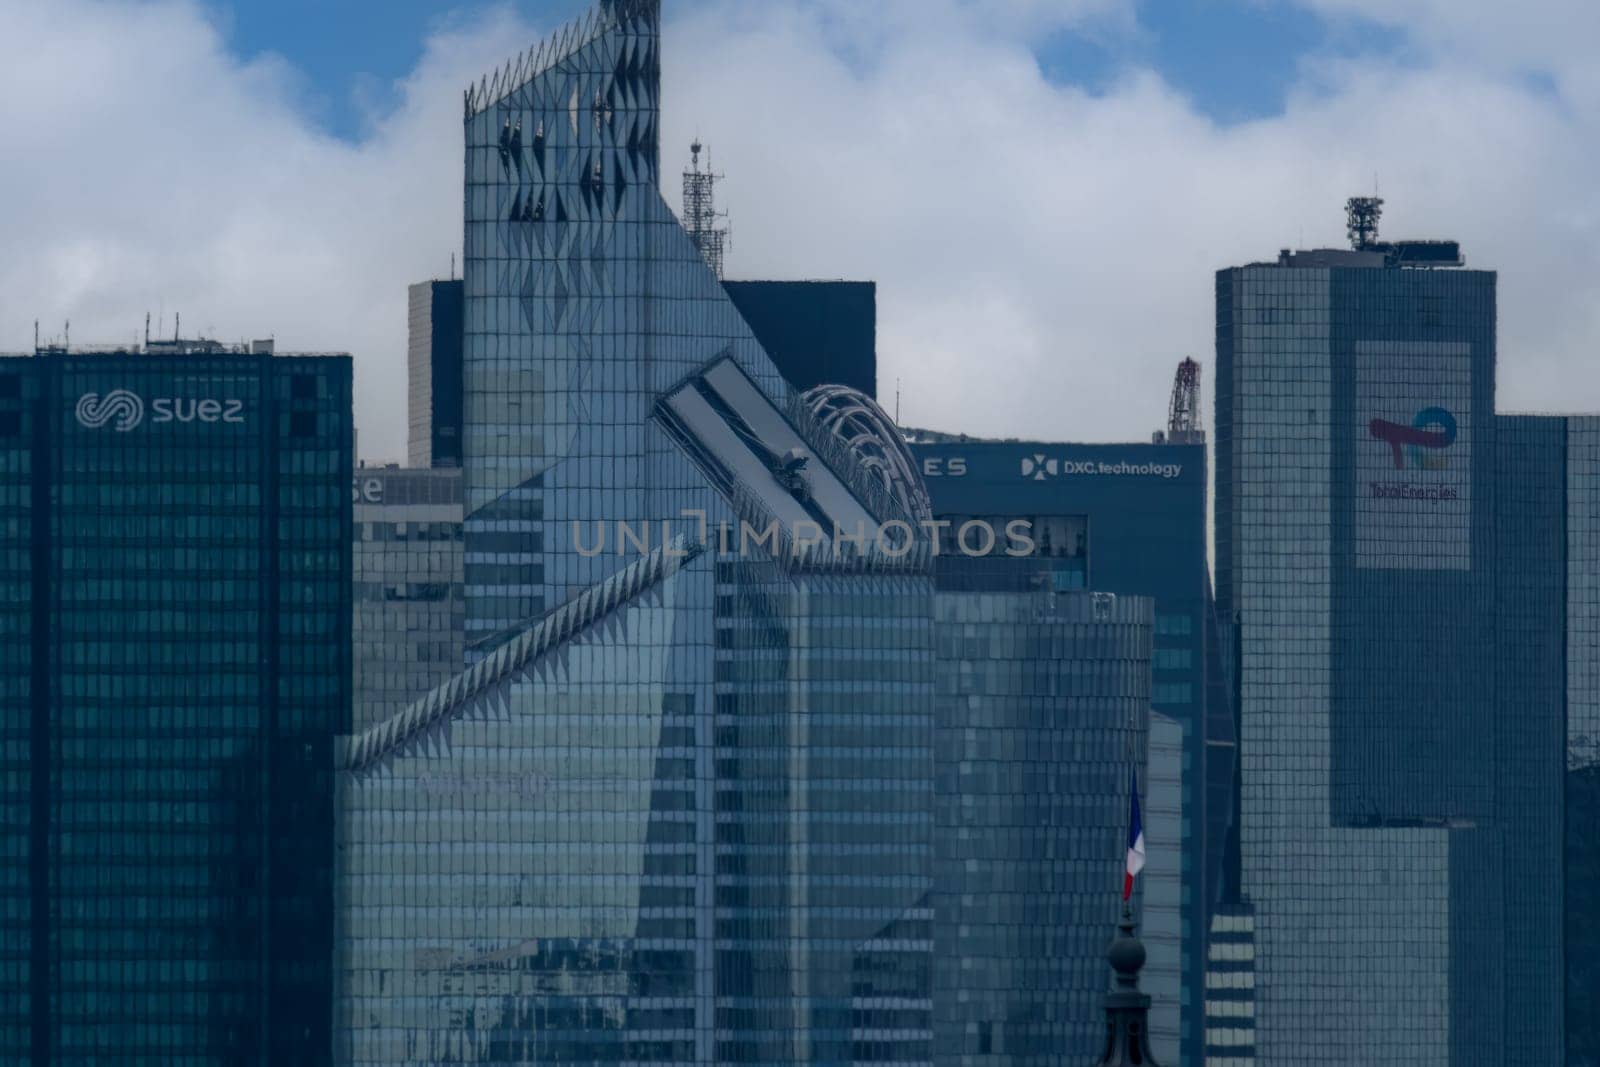 5 May 2023 Paris, France. La Defense business district in Paris. Headquarters of many national and international brands, including Total Energies and